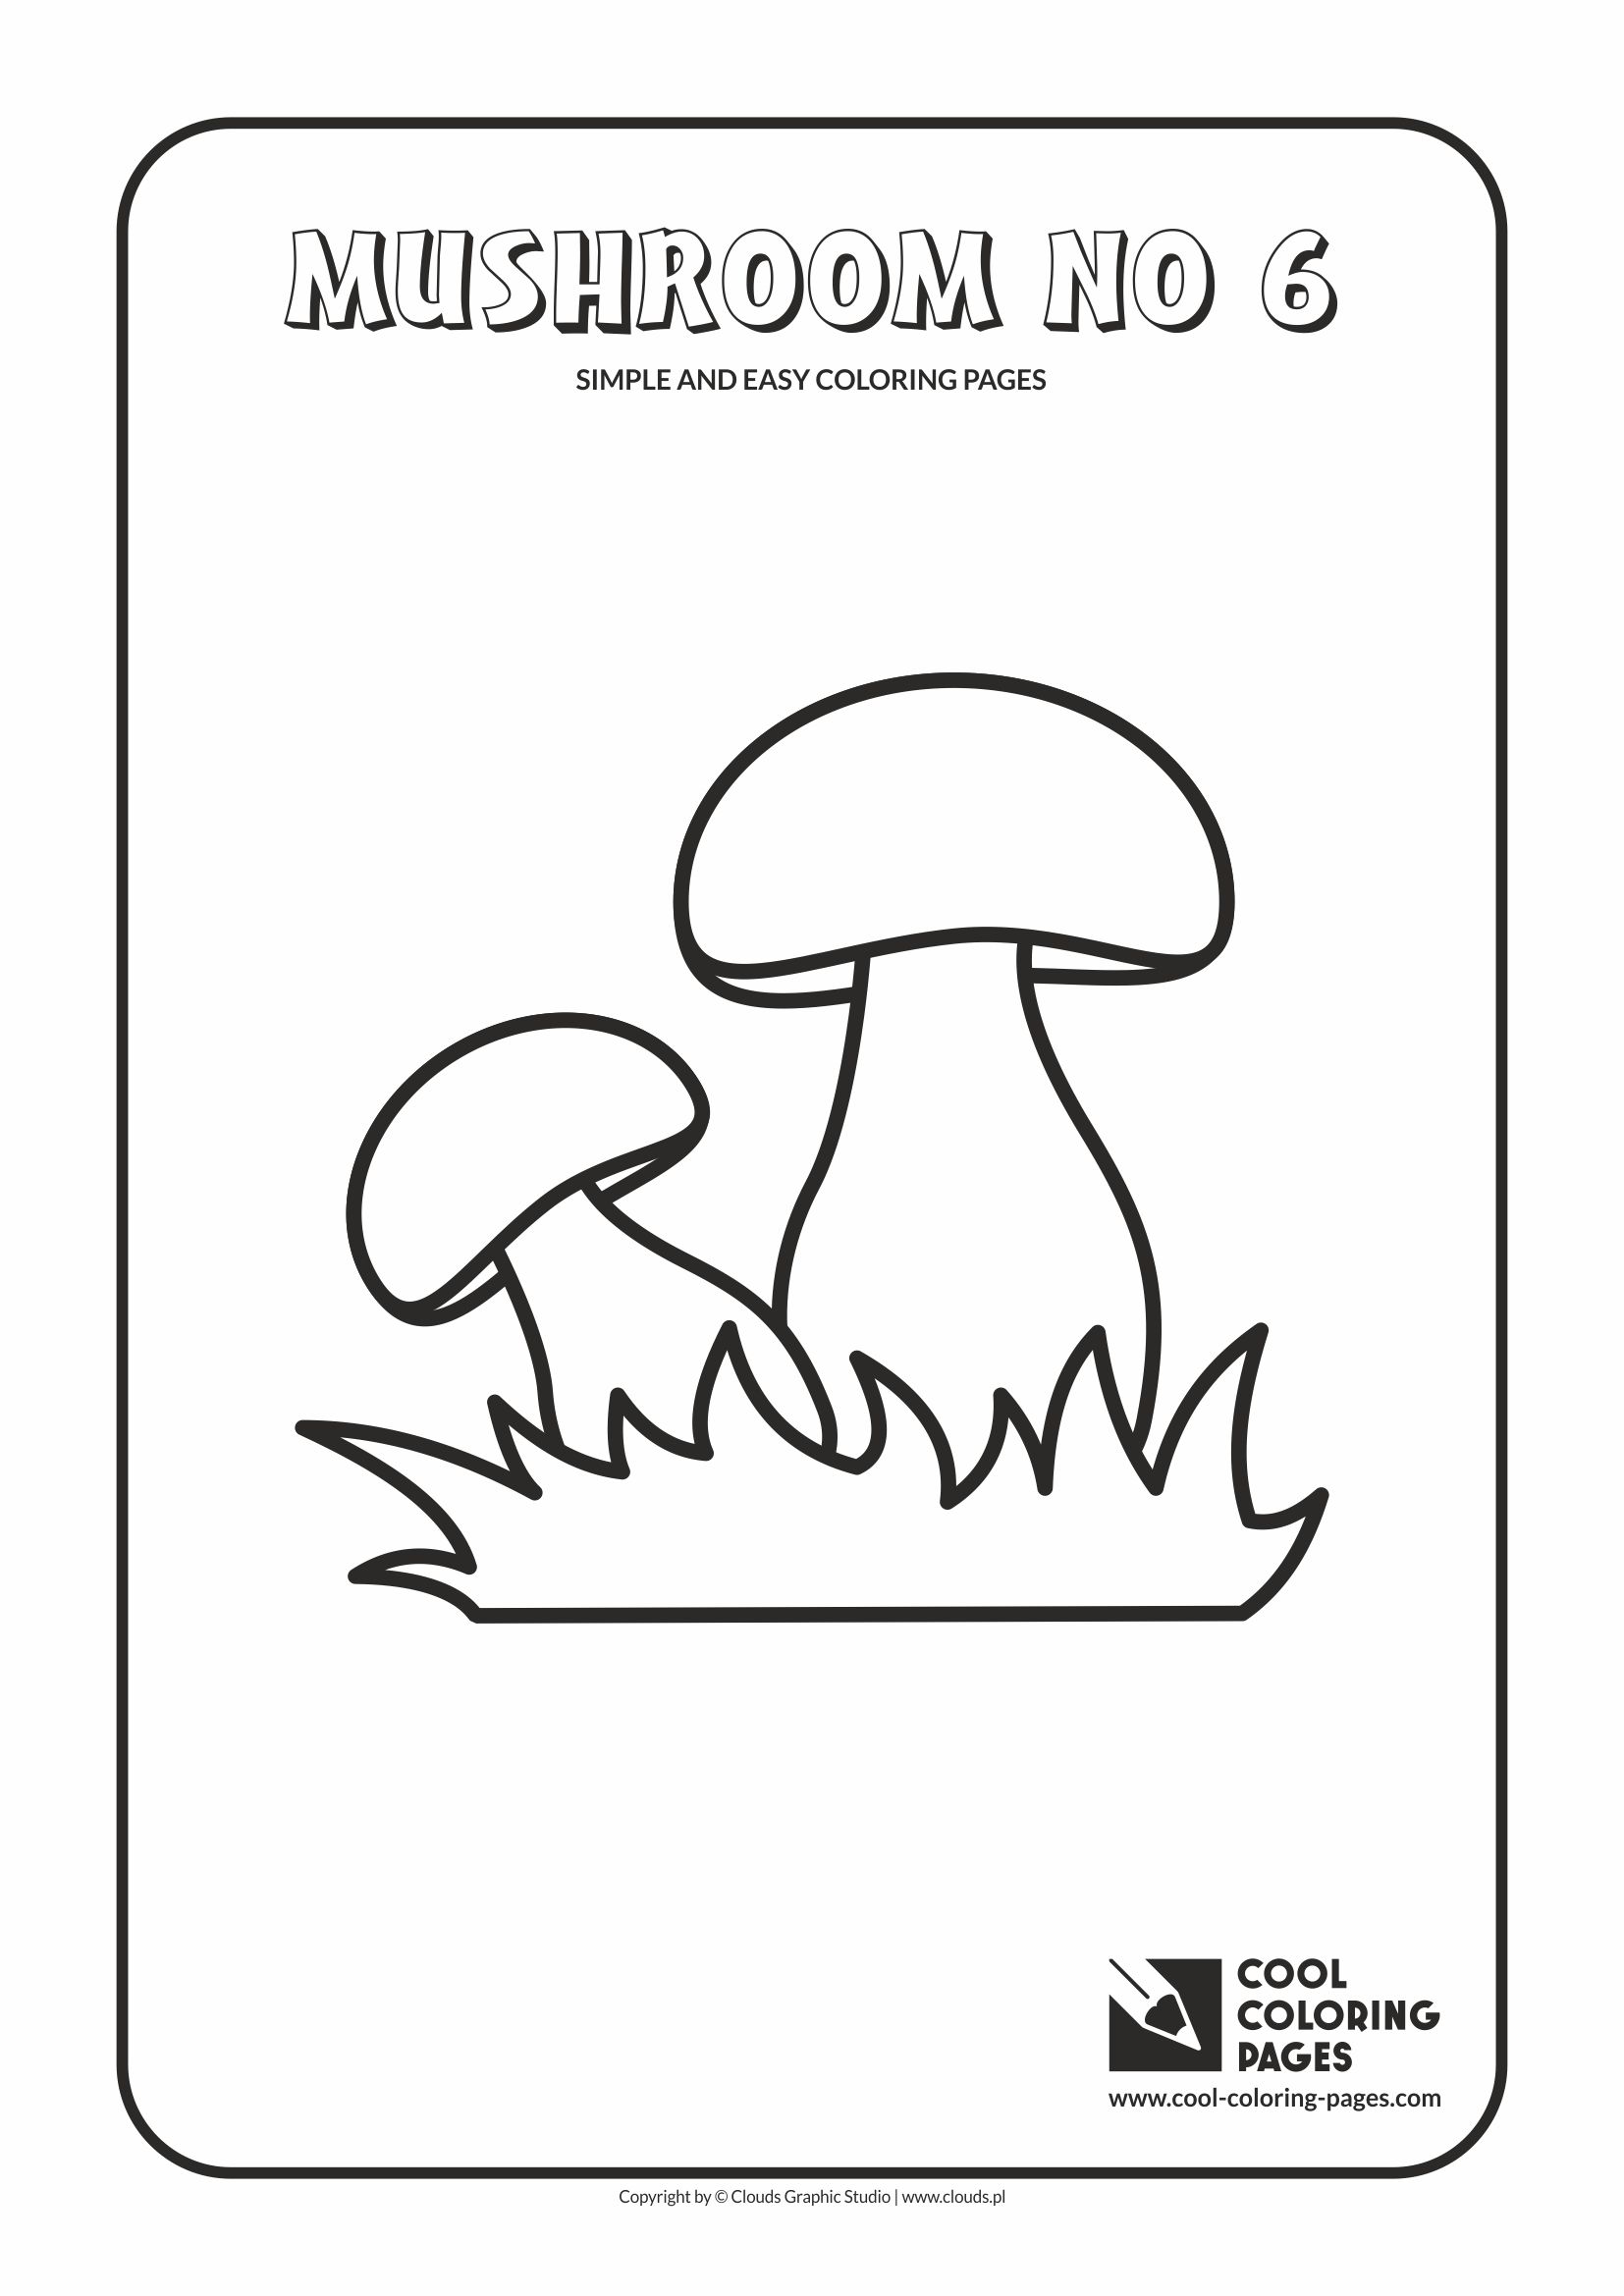 Cool coloring pages simple and easy coloring pages